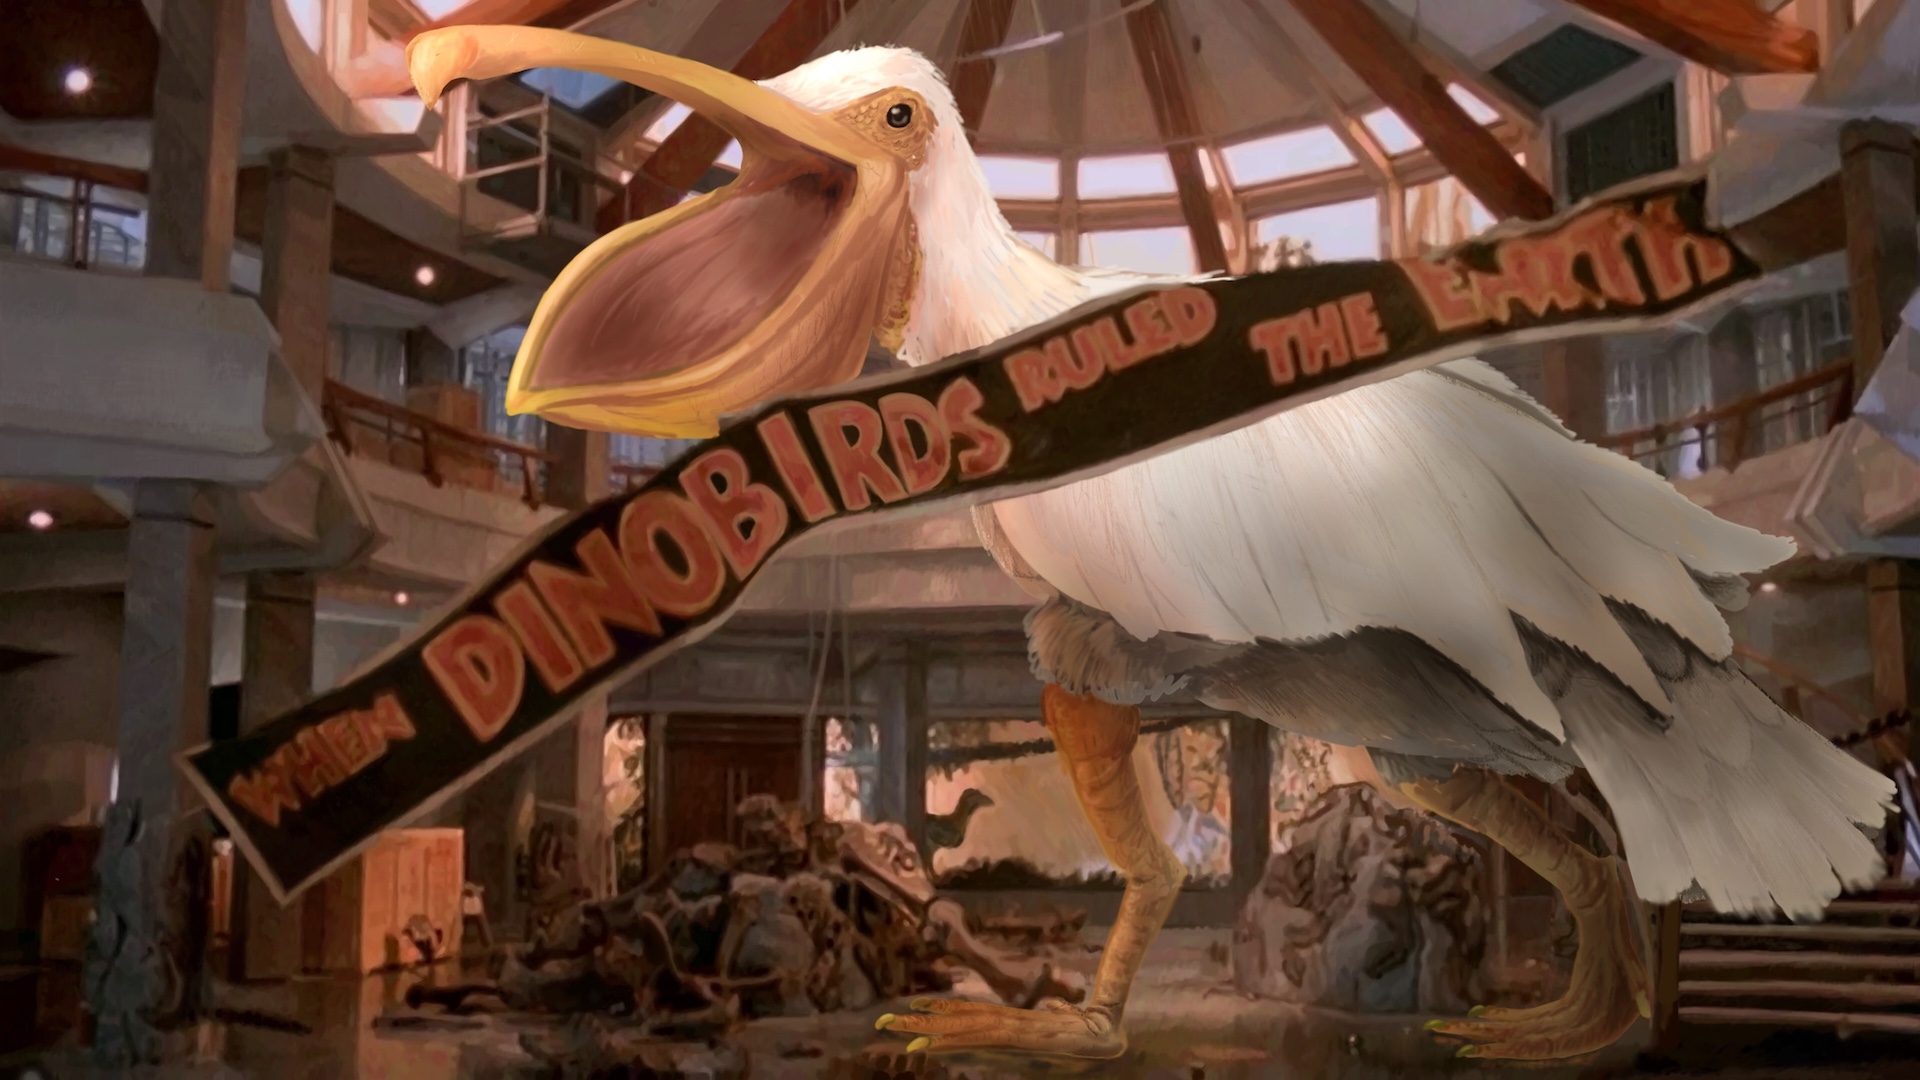 Digitally painted reproduction of of a frame from Jurassic Park, but instead of a T-Rex doing the T-Rex thing in the visitor centre, it's a giant pelican. The falling banner also says 'dinobirds' instead of dinosaurs.'